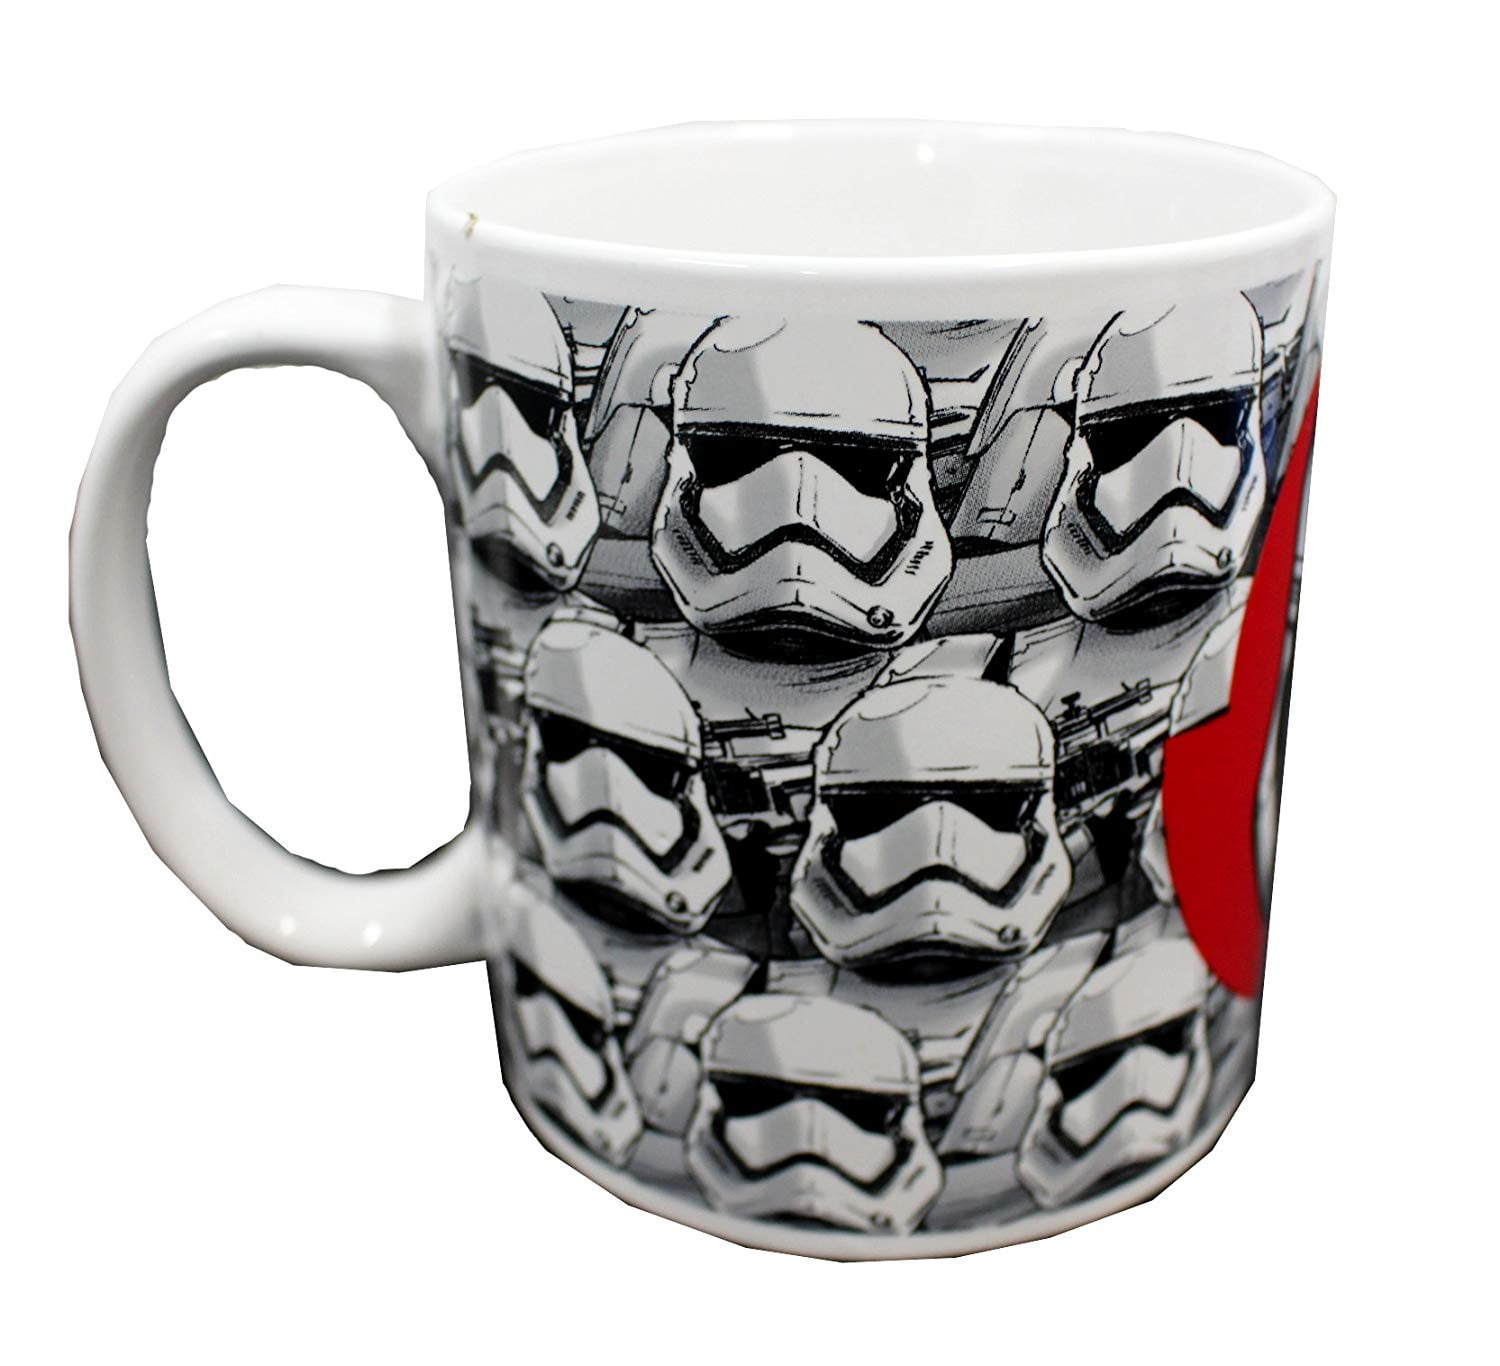 Star Wars There's a Rebel in All of Us 11 oz Ceramic Mug